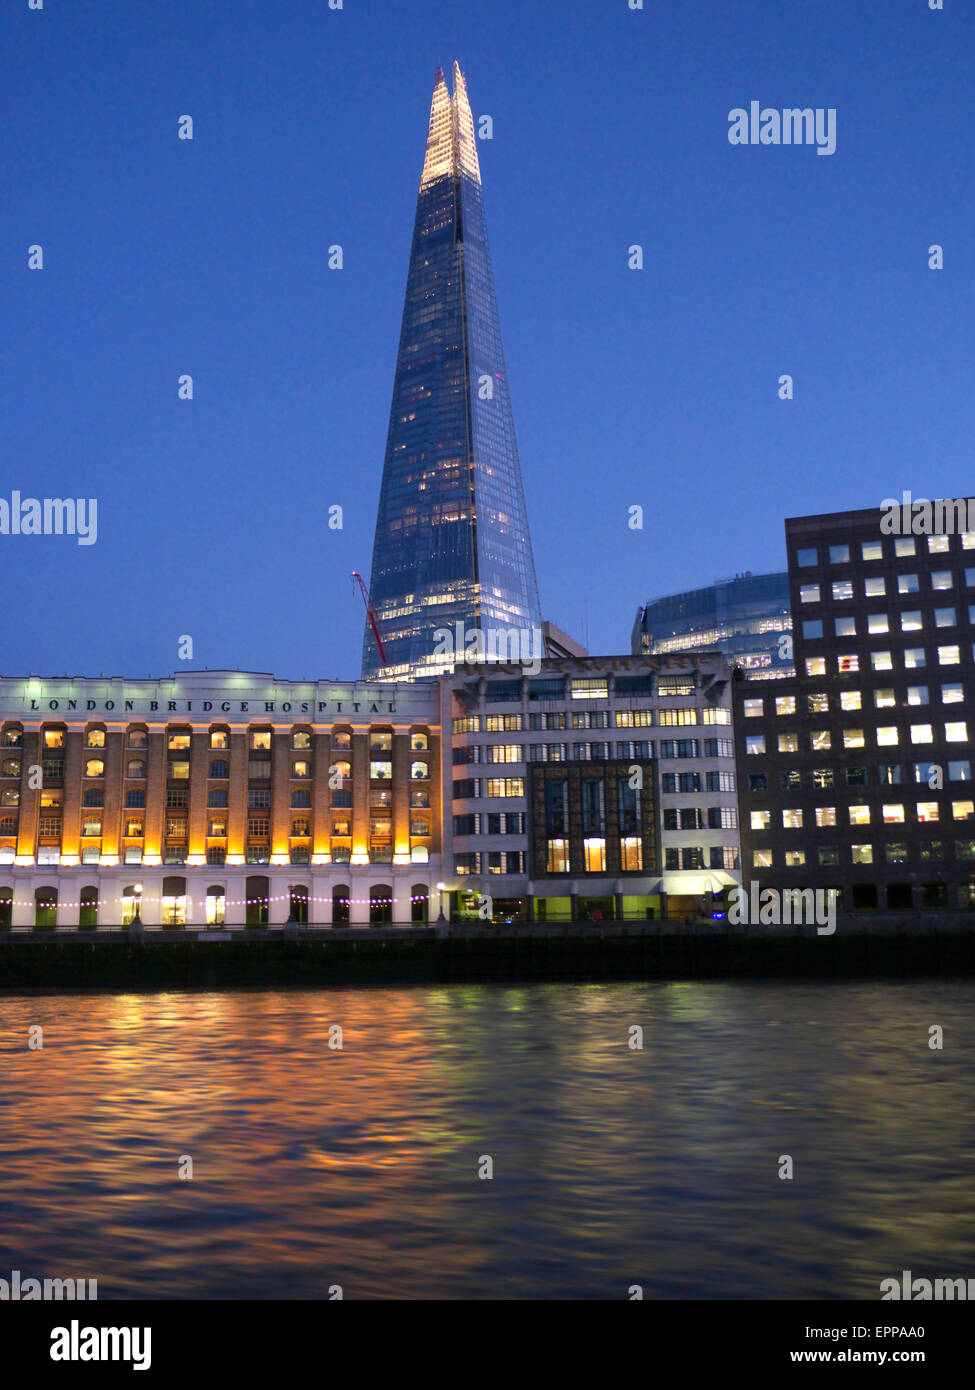 View from Thames Clipper river boat navigating upstream of The Shard, London Bridge Hospital and City offices SE1 Stock Photo